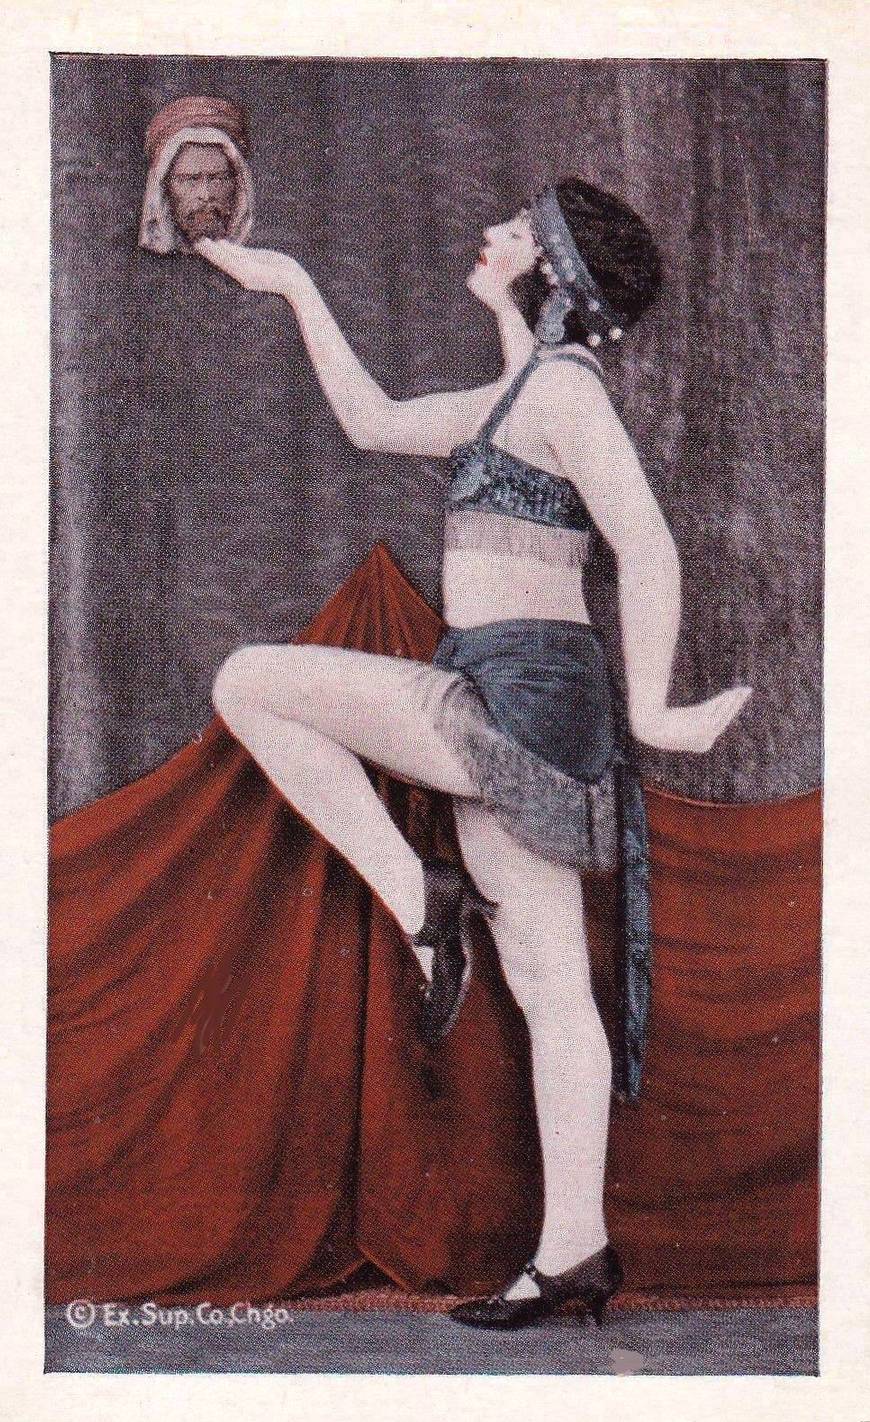 A ARCADE CARD - EXHIBIT SUPPLY COMPANY - WOMAN MARCHING PROFILE HOLDING UP A SMALL HEAD IN ONE HAND - TINTED SERIES - 1920s